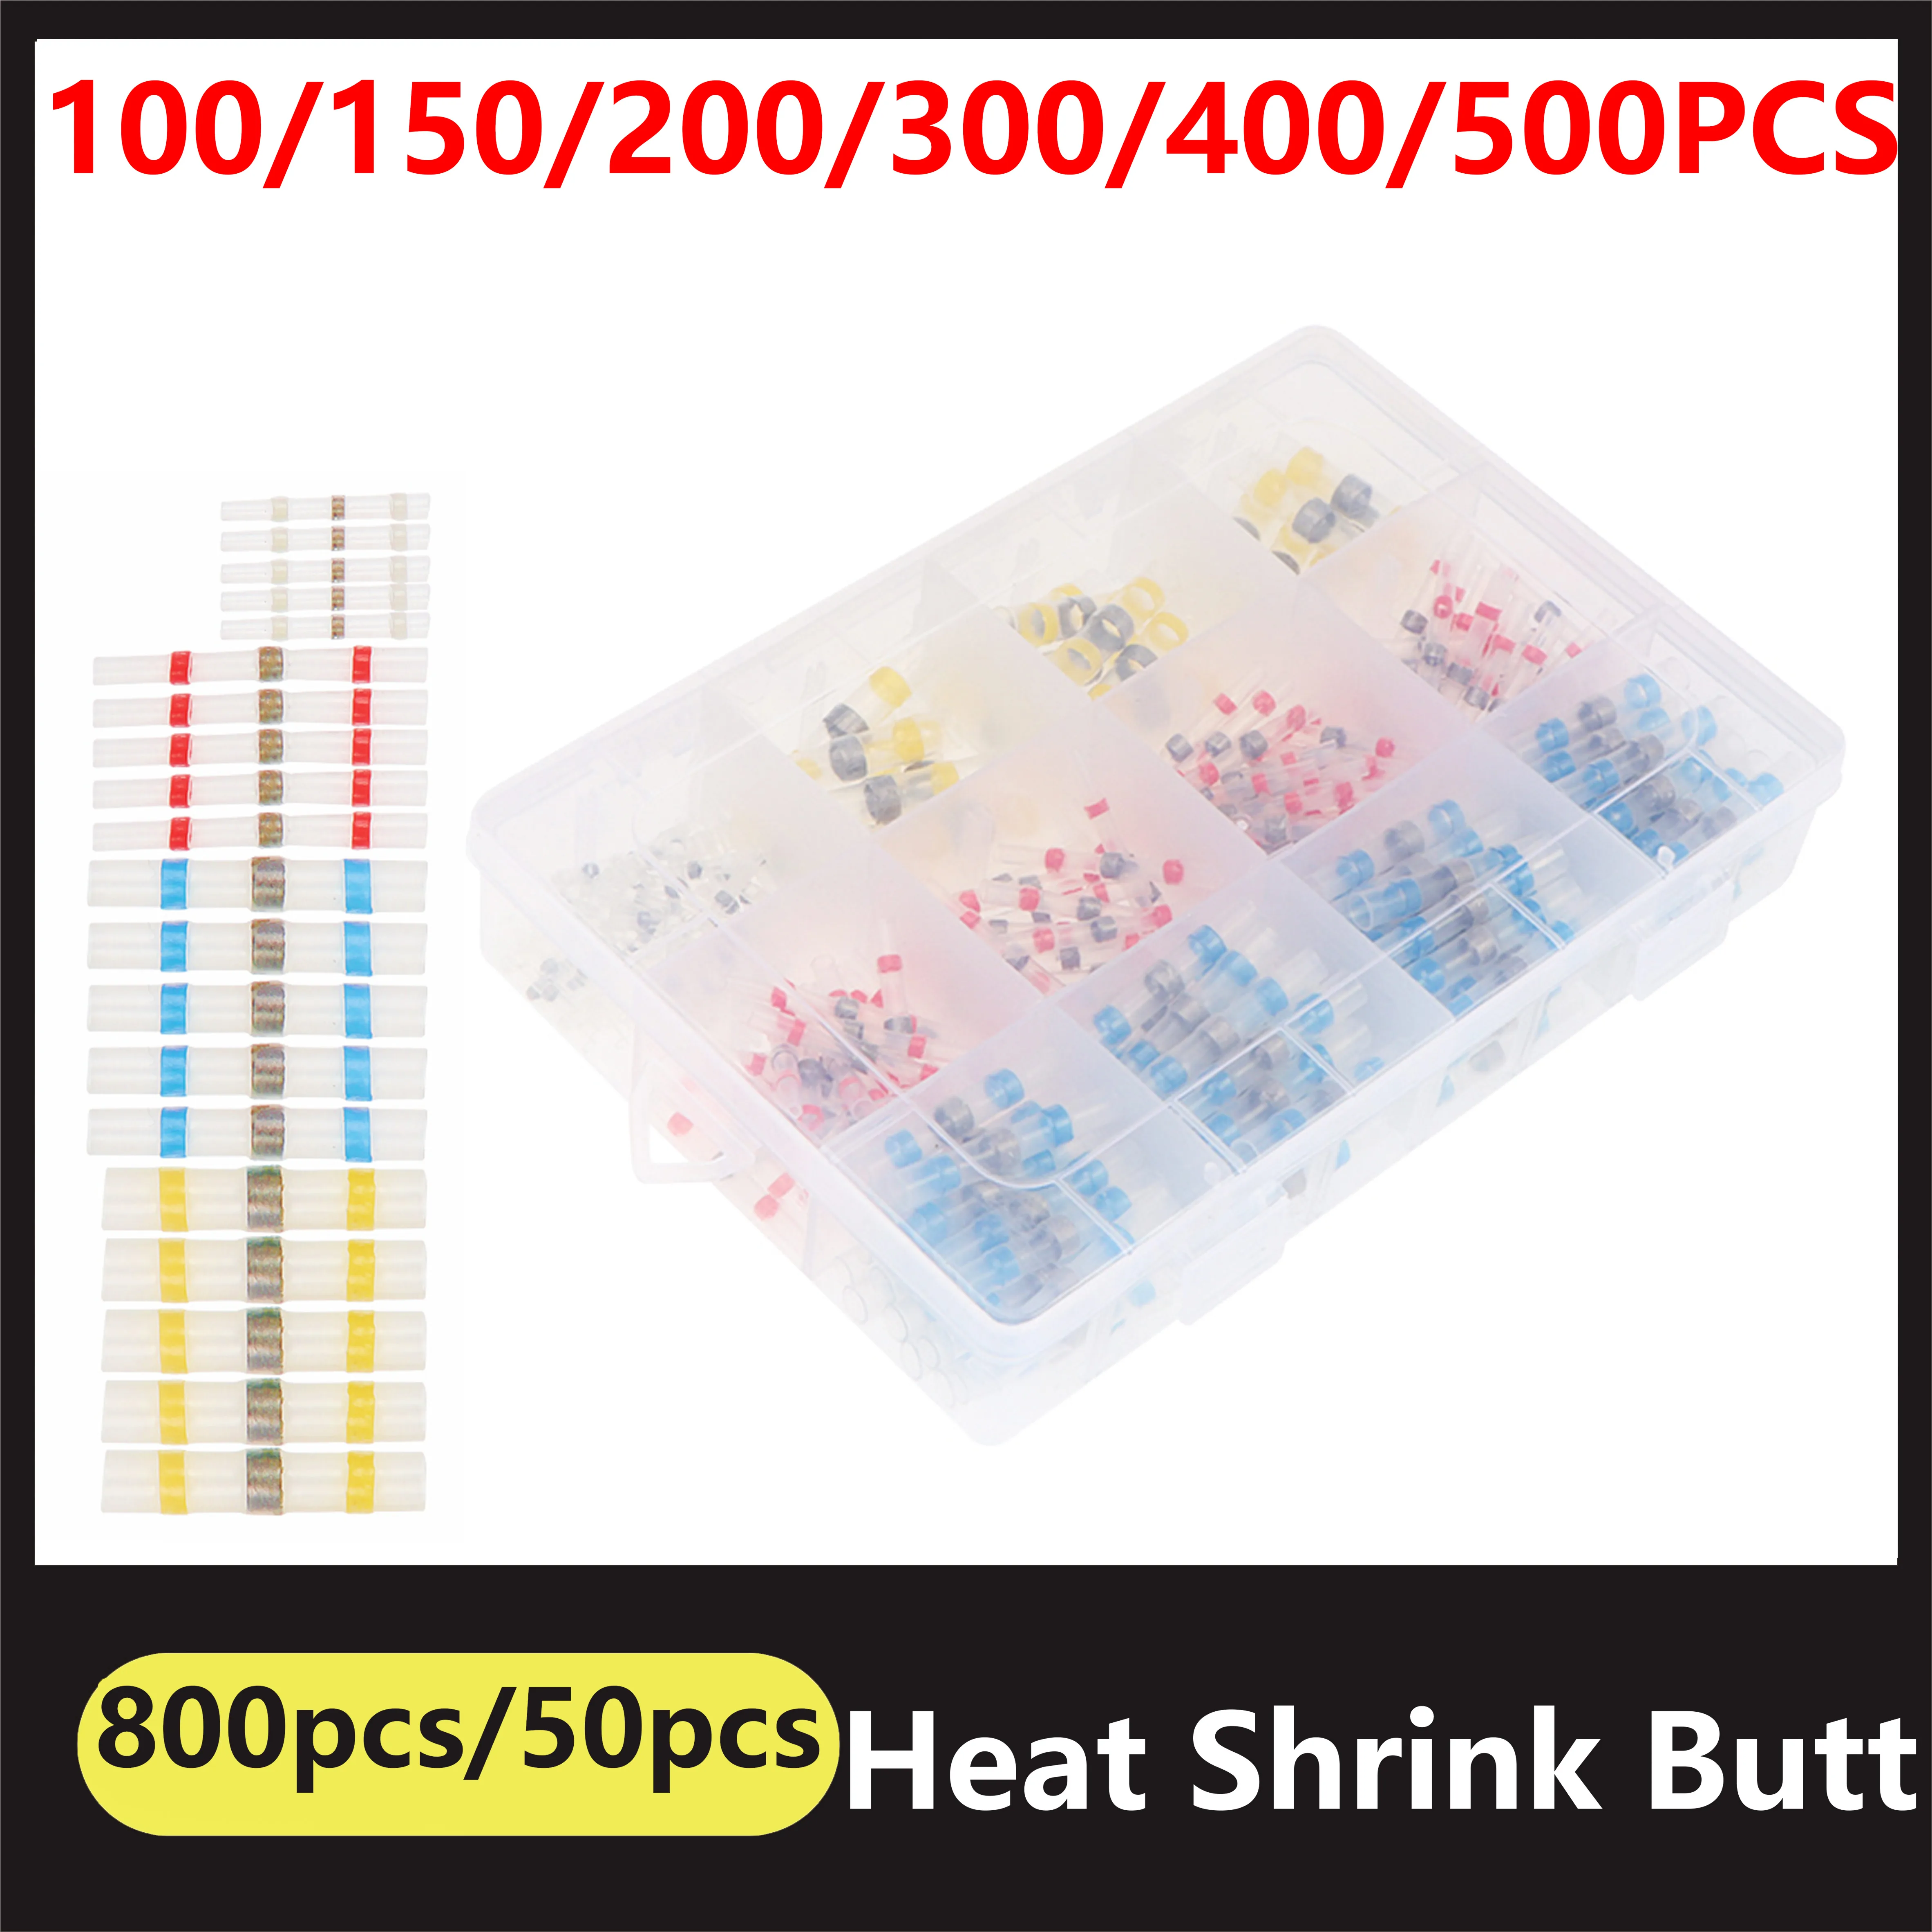 100500300pcs Mixed Heat Shrink Connect Heat Shrink Solder Butt Connectors Solder Wire Insulated Butt Connectors Kit